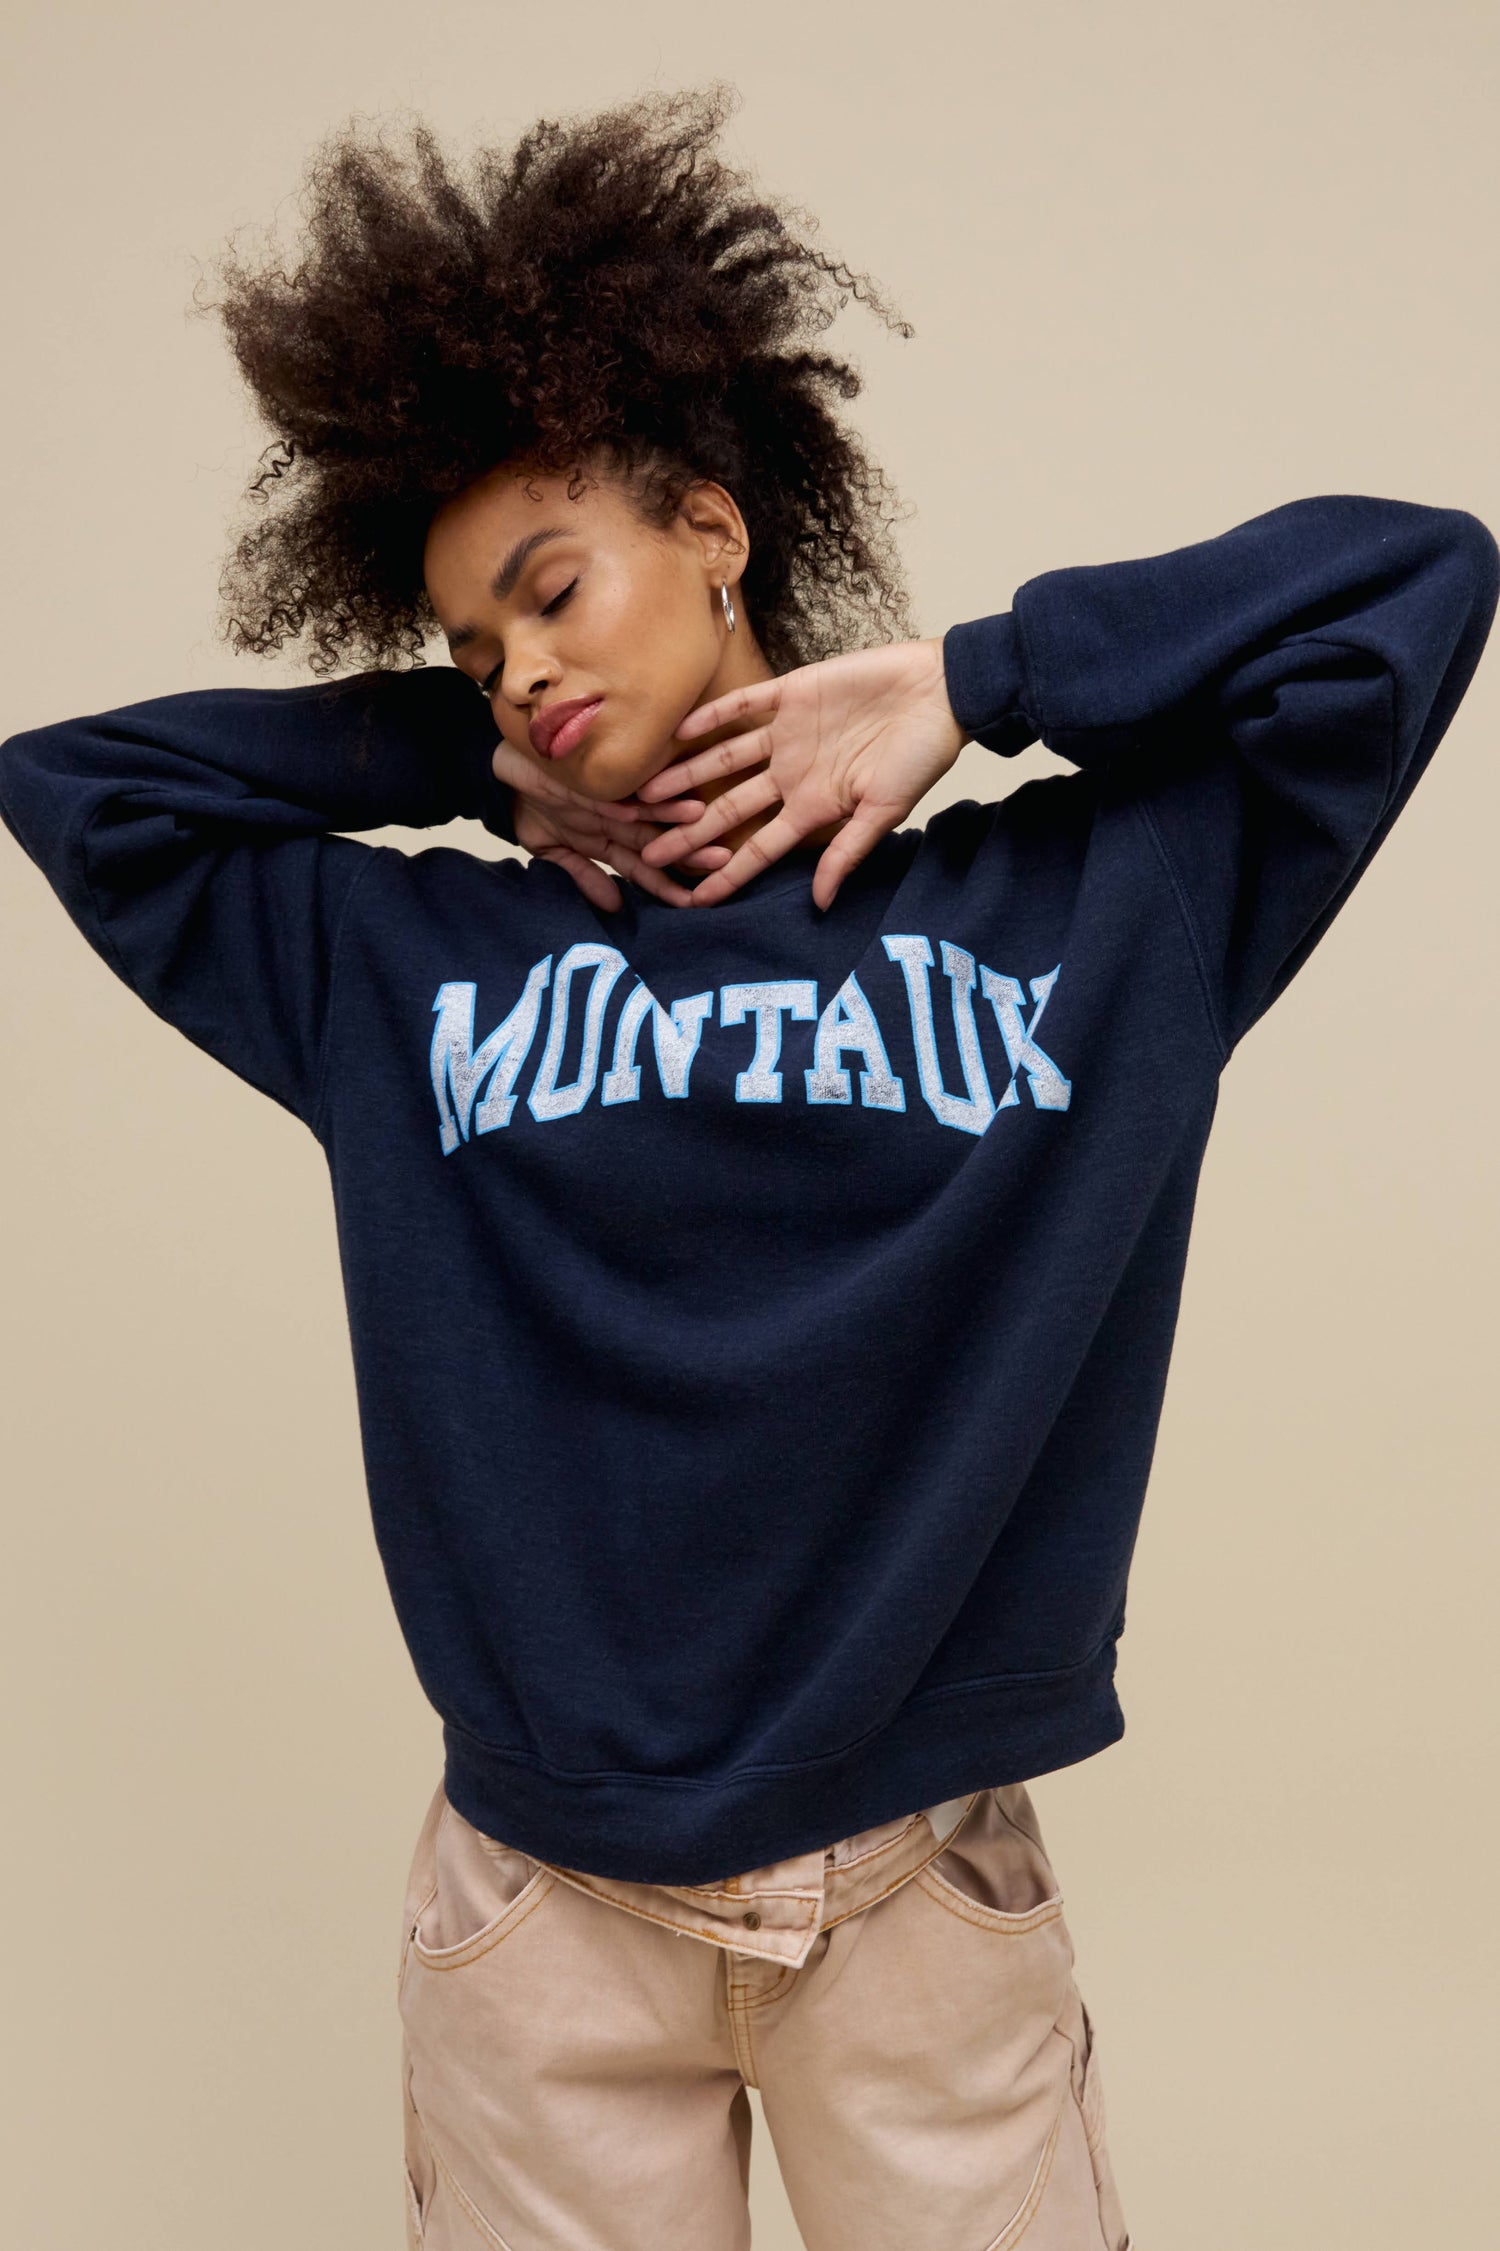 Curly-haired model wearing an oversized tri-blend fleece sweatshirt in navy heather with contrast light blue 'Montauk' collegiate style lettering